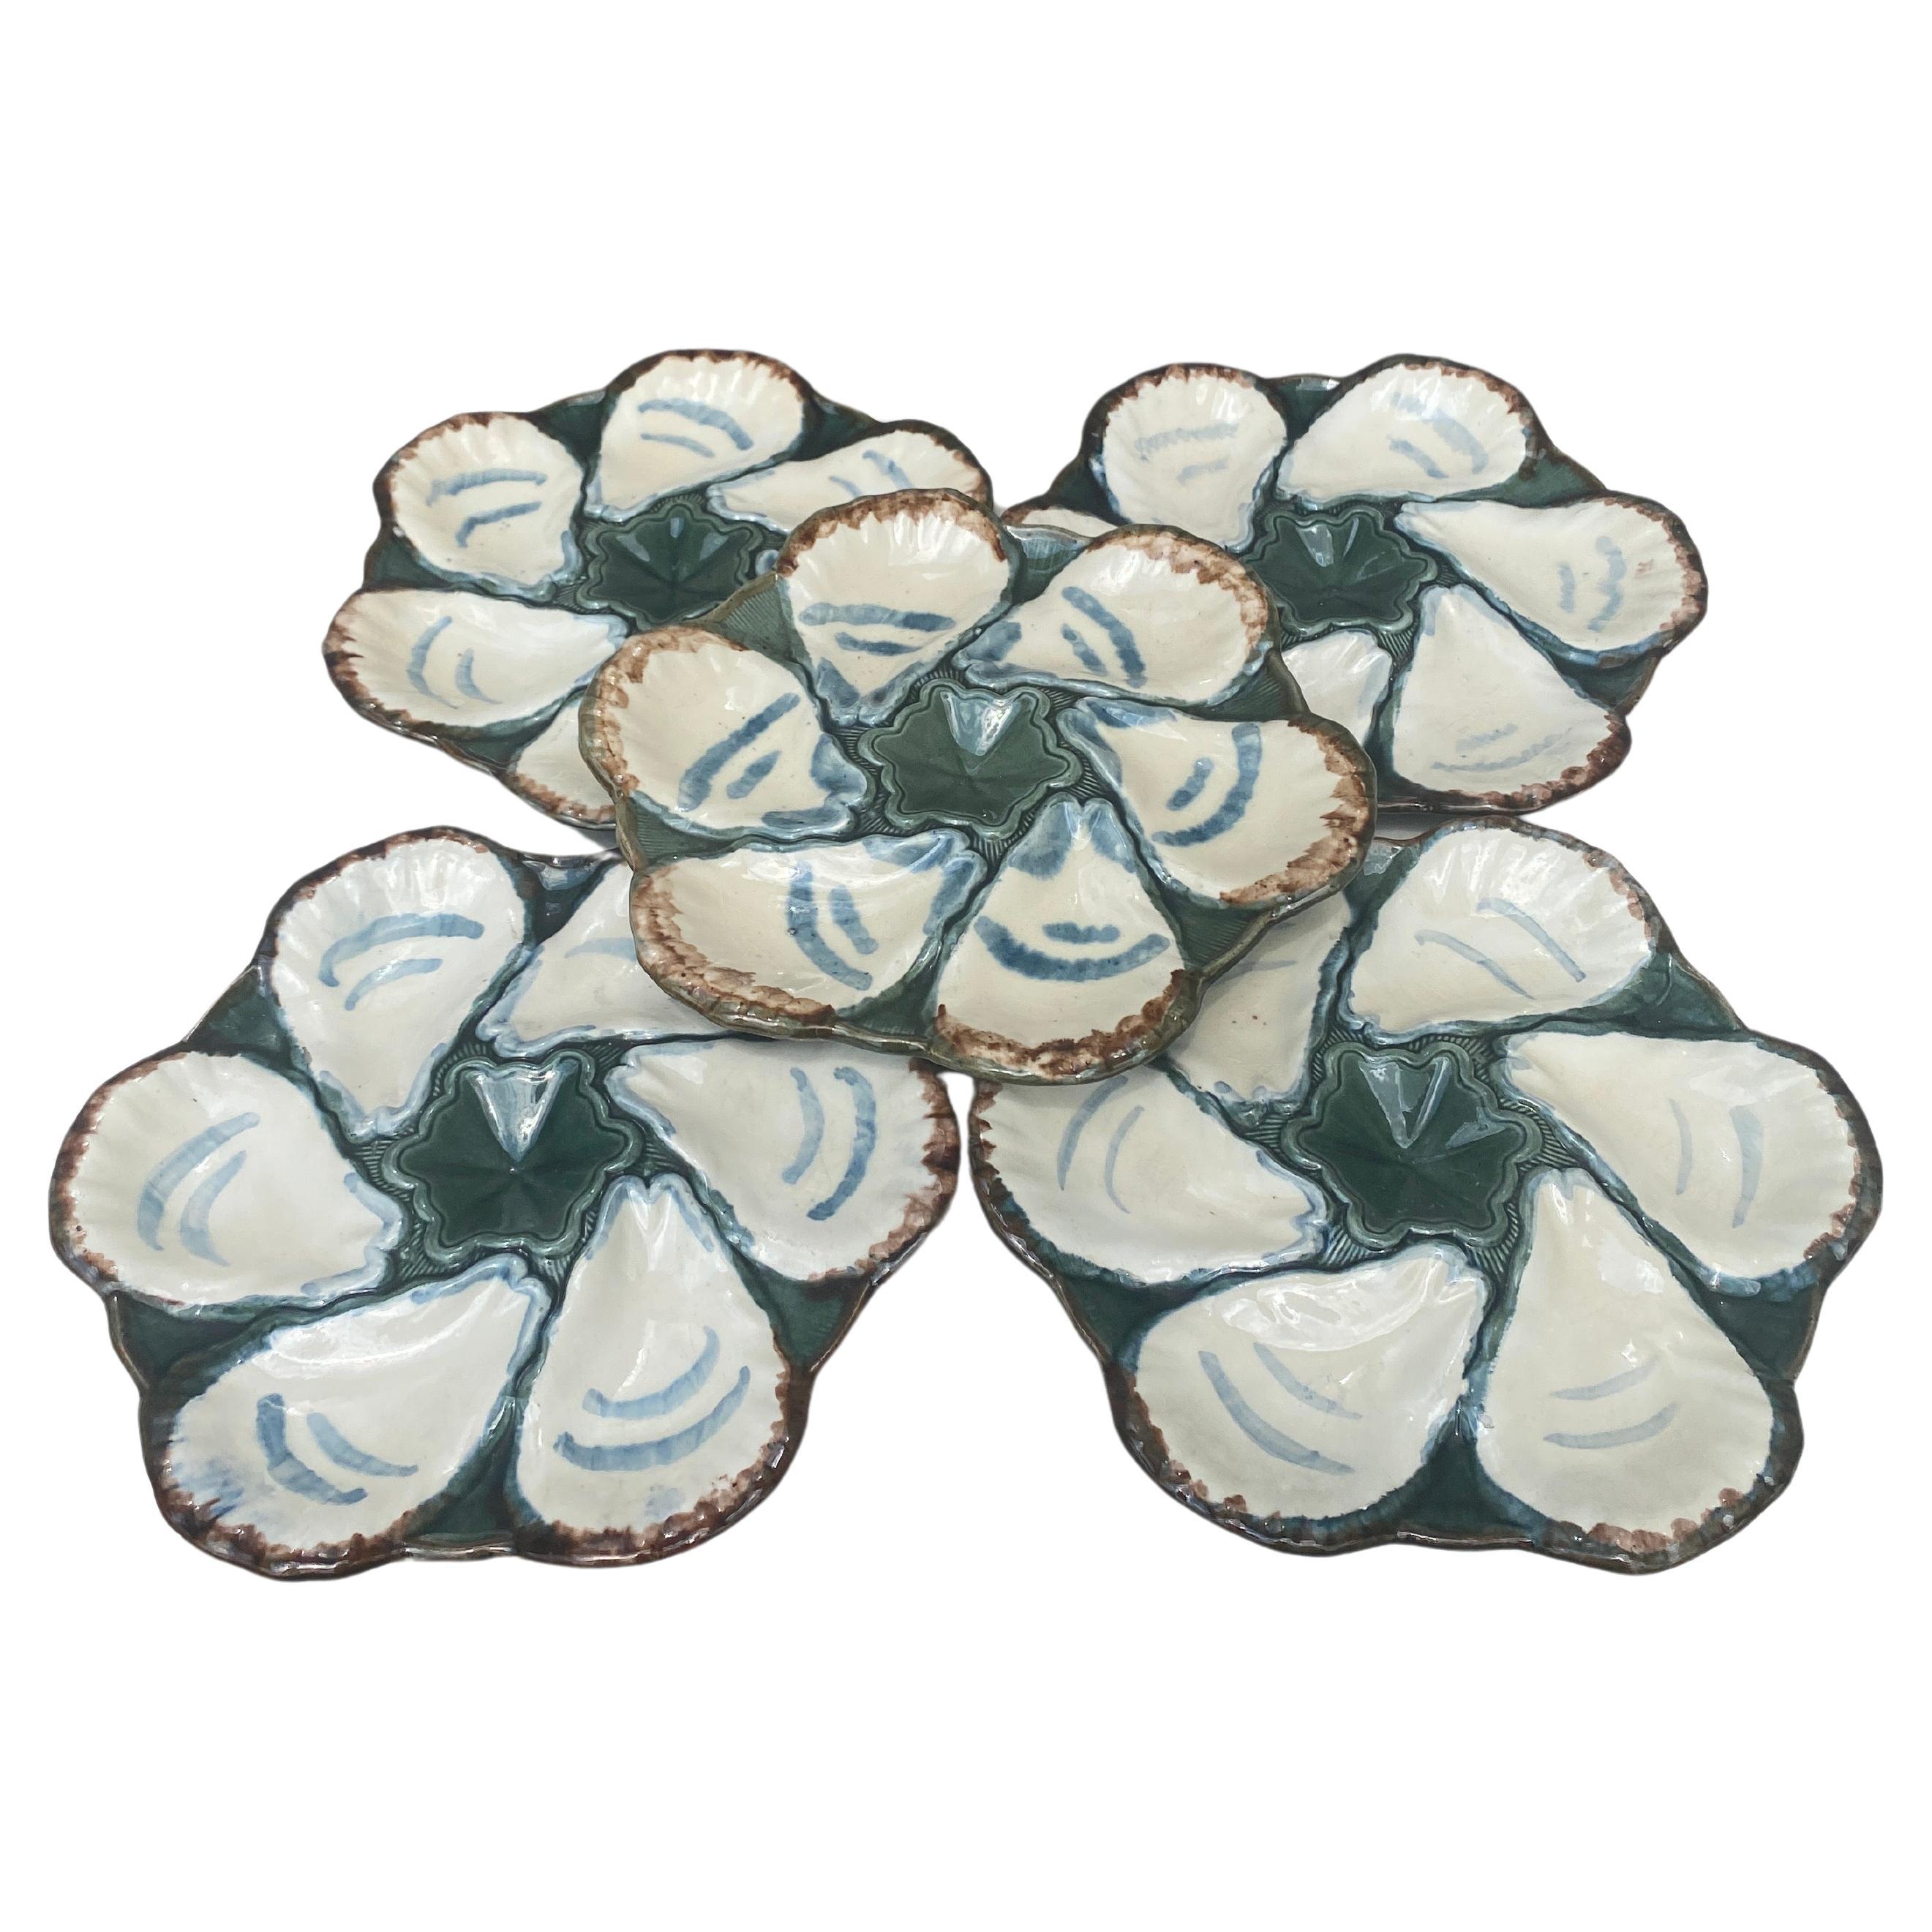 Set of 6 French Majolica oyster plate signed Longchamp, circa 1900.